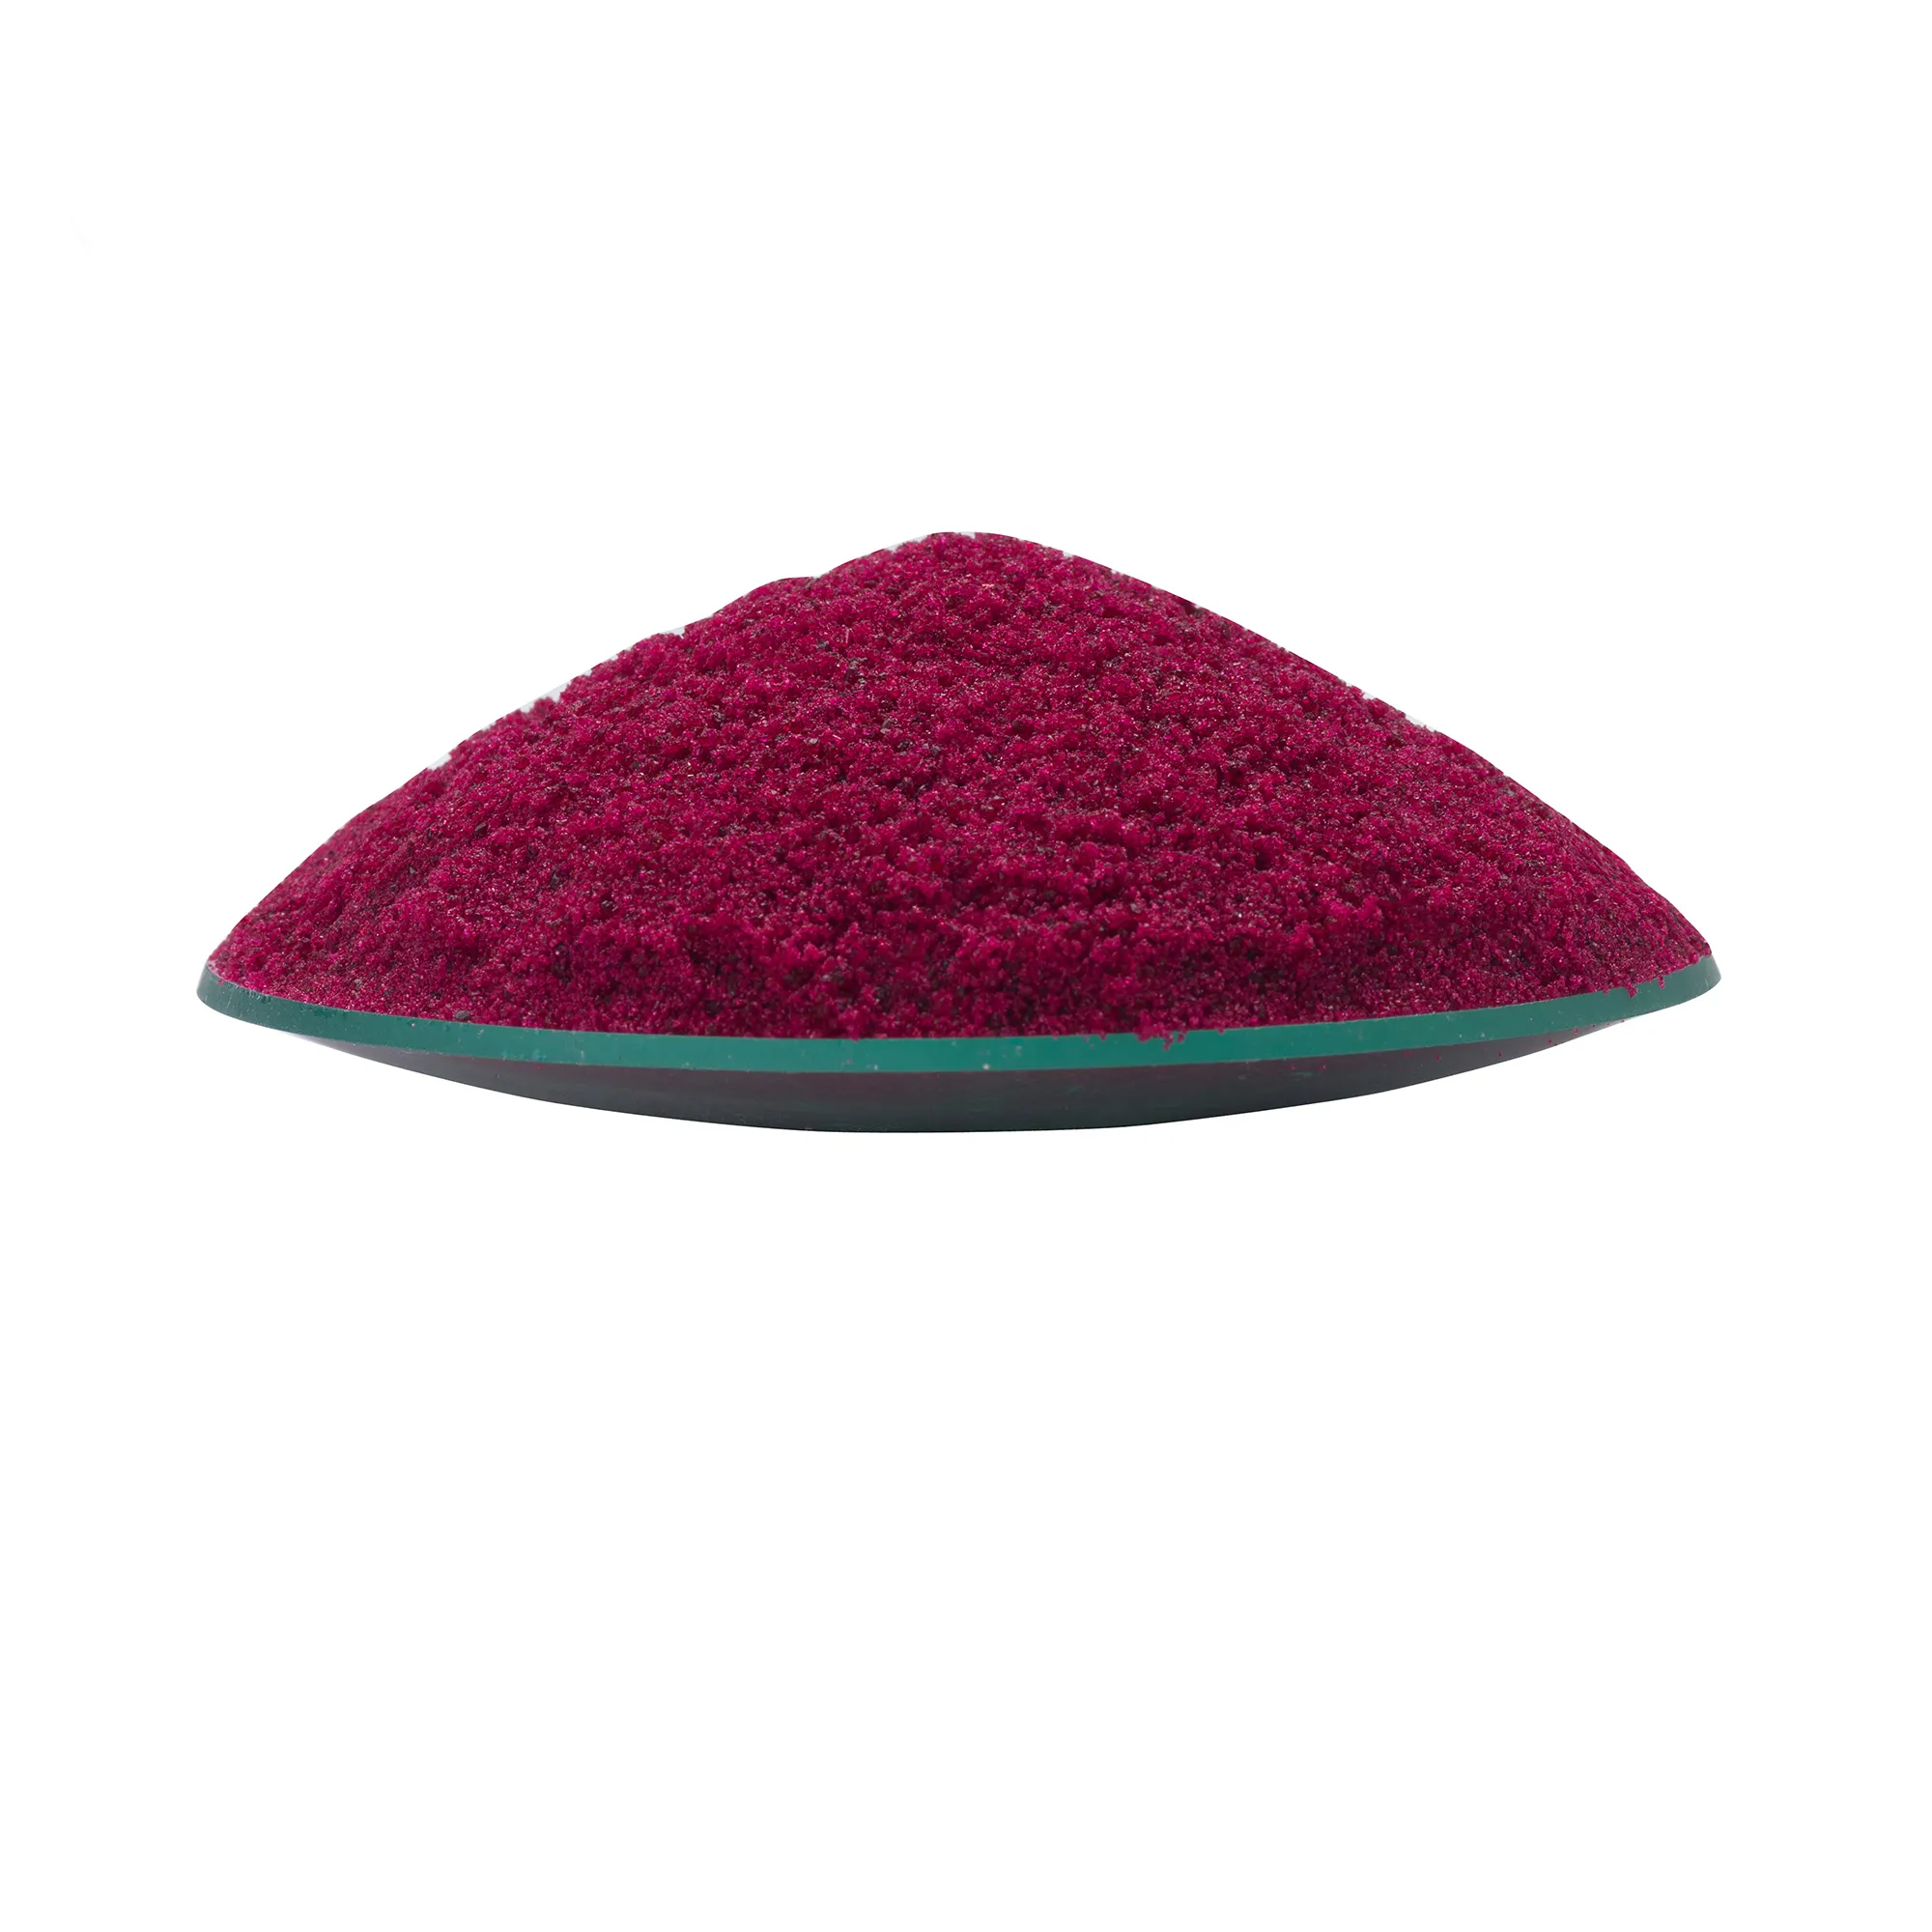 High quality Cobalt Chloride/cocl2 with fast delivery